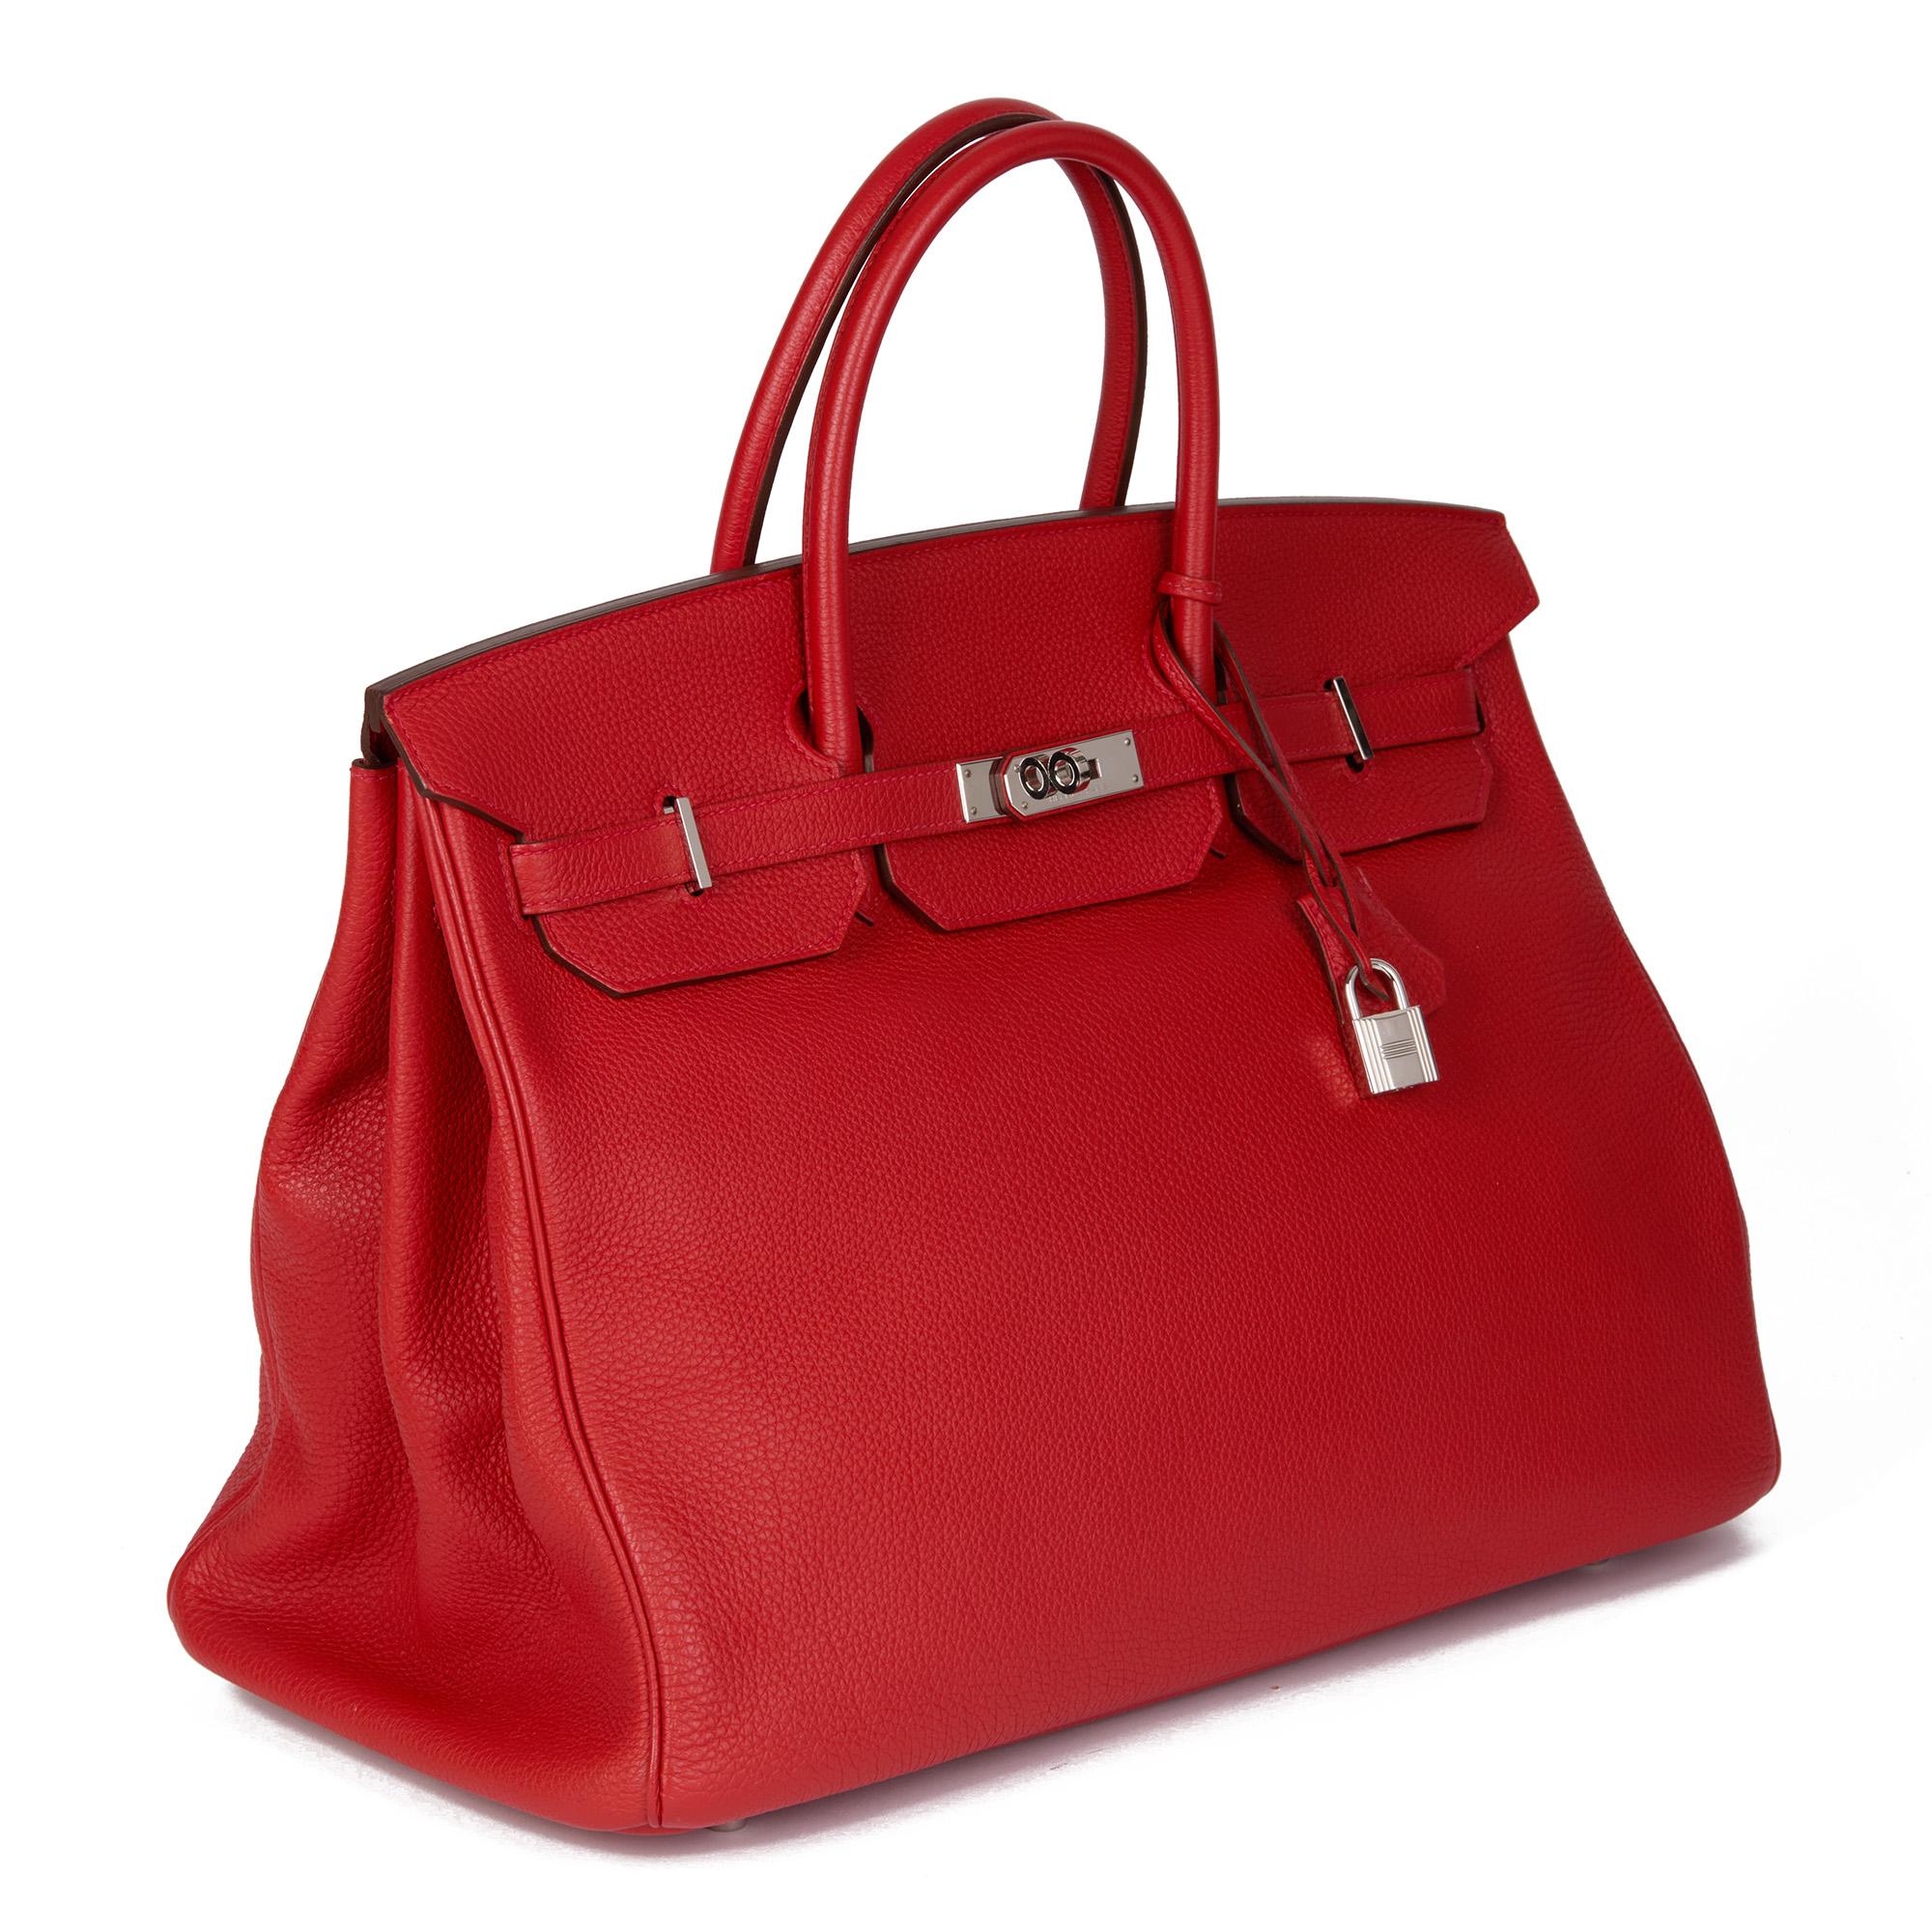 HERMÈS
Rouge Tomate Togo Leather Birkin 40cm

Serial Number: [P]
Age (Circa): 2012
Accompanied By: Hermès Dust Bag, Padlock, Keys, Clochette
Authenticity Details: Date Stamp (Made in France) 
Gender: Ladies
Type: Tote

Colour: Rouge Tomate
Hardware: